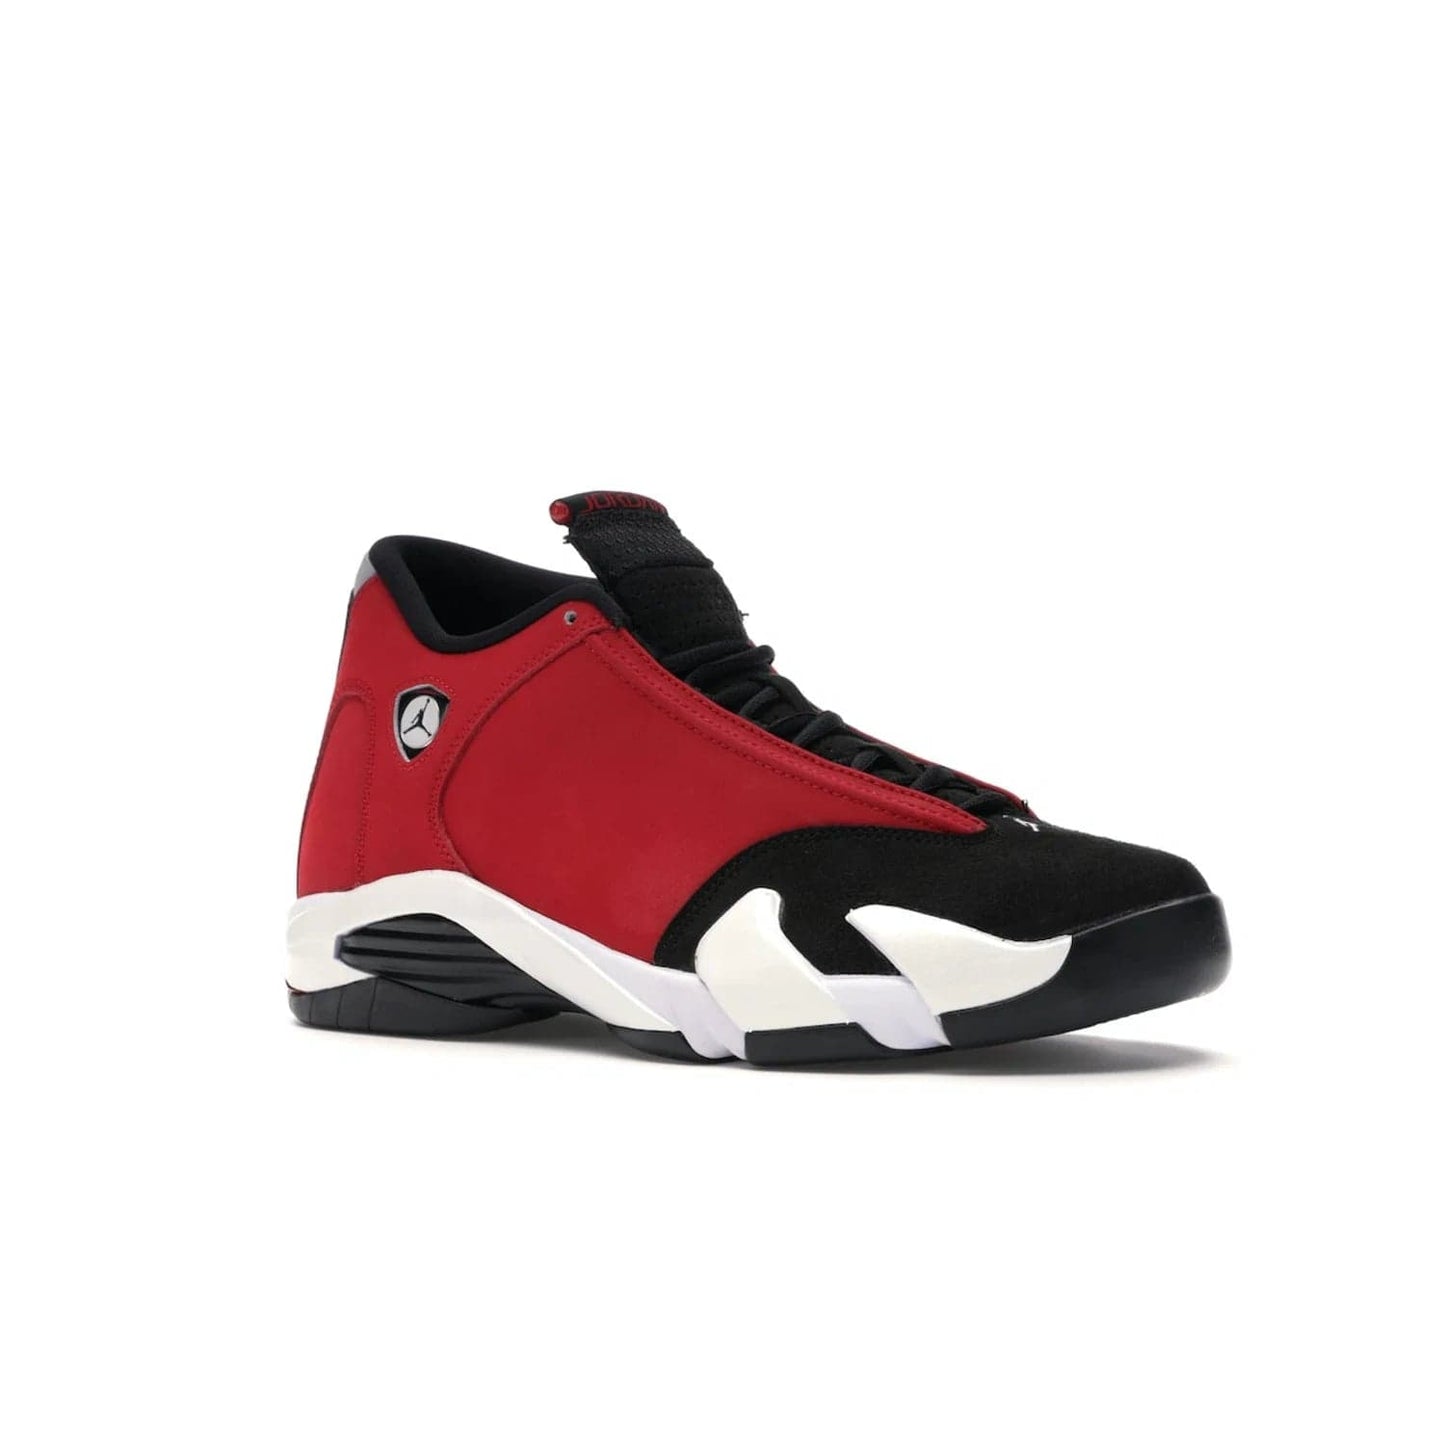 Jordan 14 Retro Gym Red Toro - Image 4 - Only at www.BallersClubKickz.com - Feel the Chicago Bulls energy with the Jordan 14 Retro Gym Red Toro! Black, red, and white design unites performance and fashion. Get your hands on this limited edition Jordan and show off your style today.